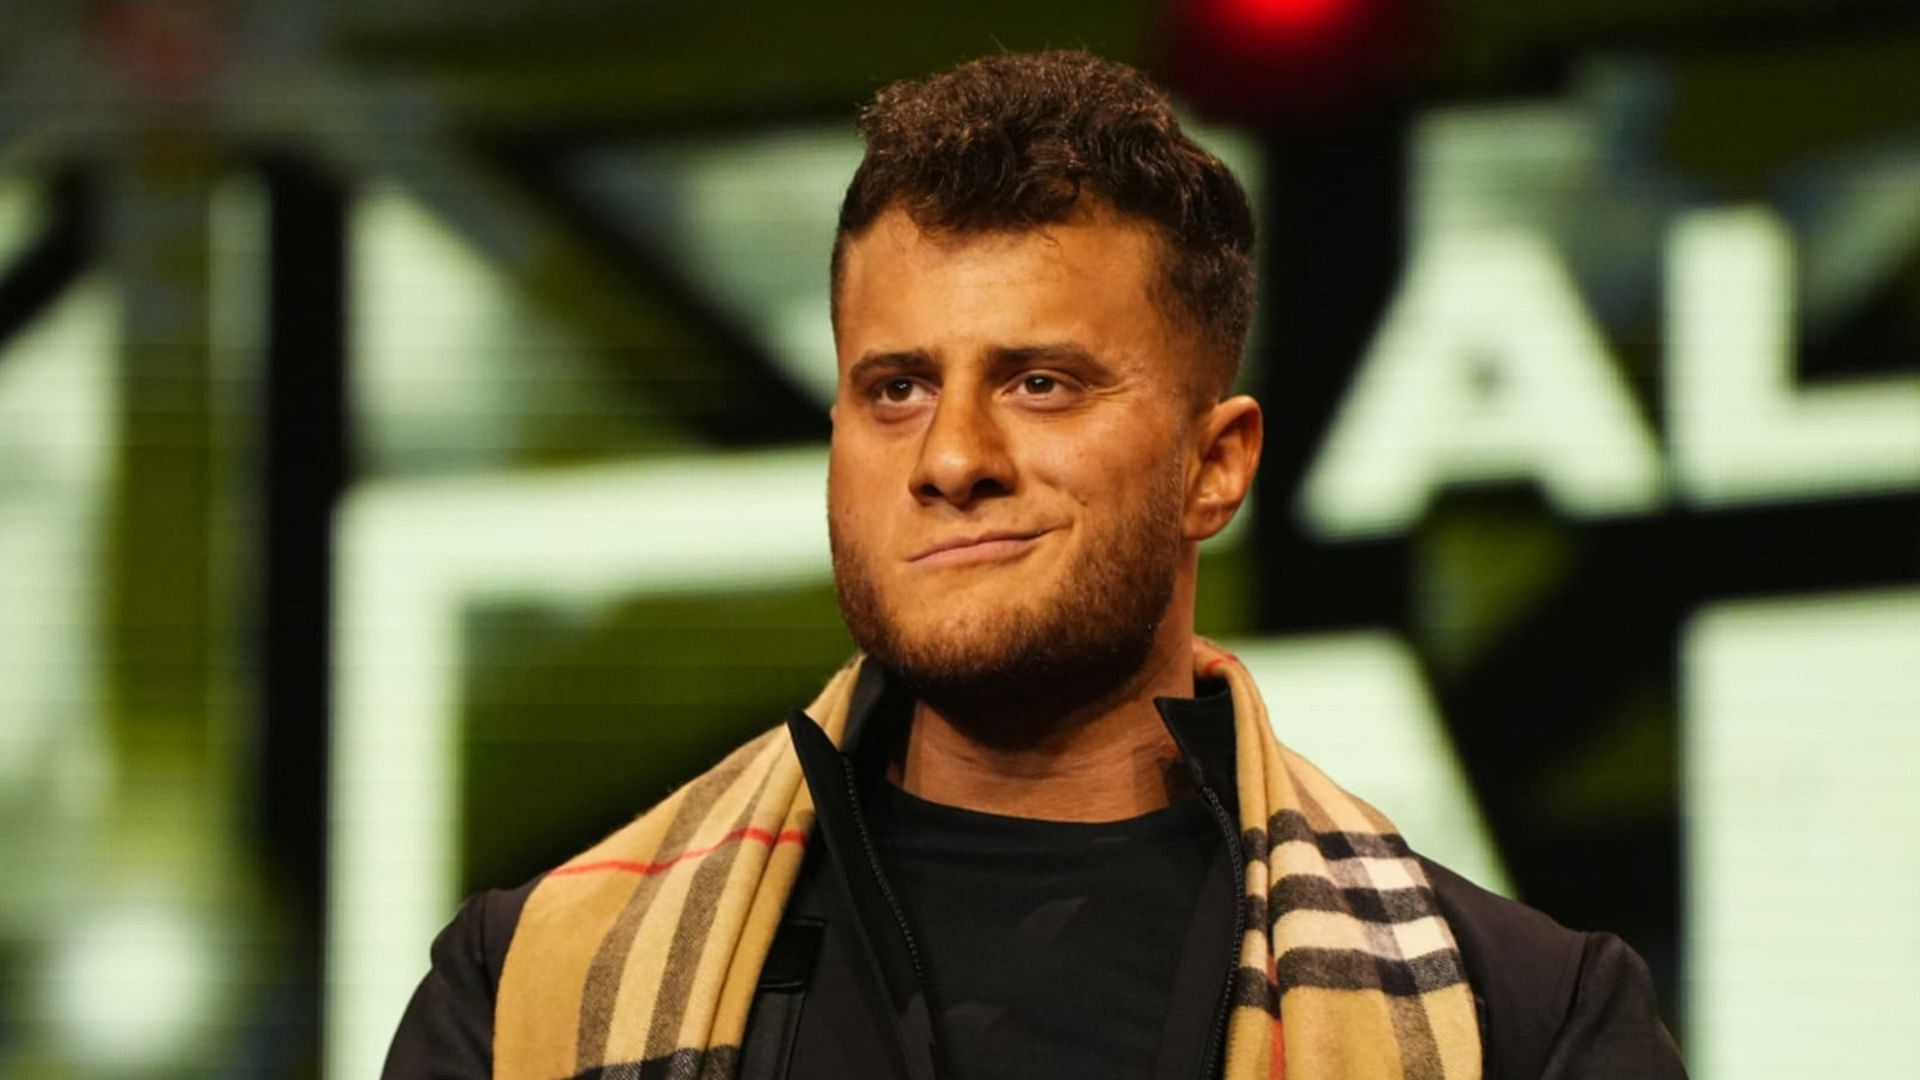 MJF is the current AEW World Champion